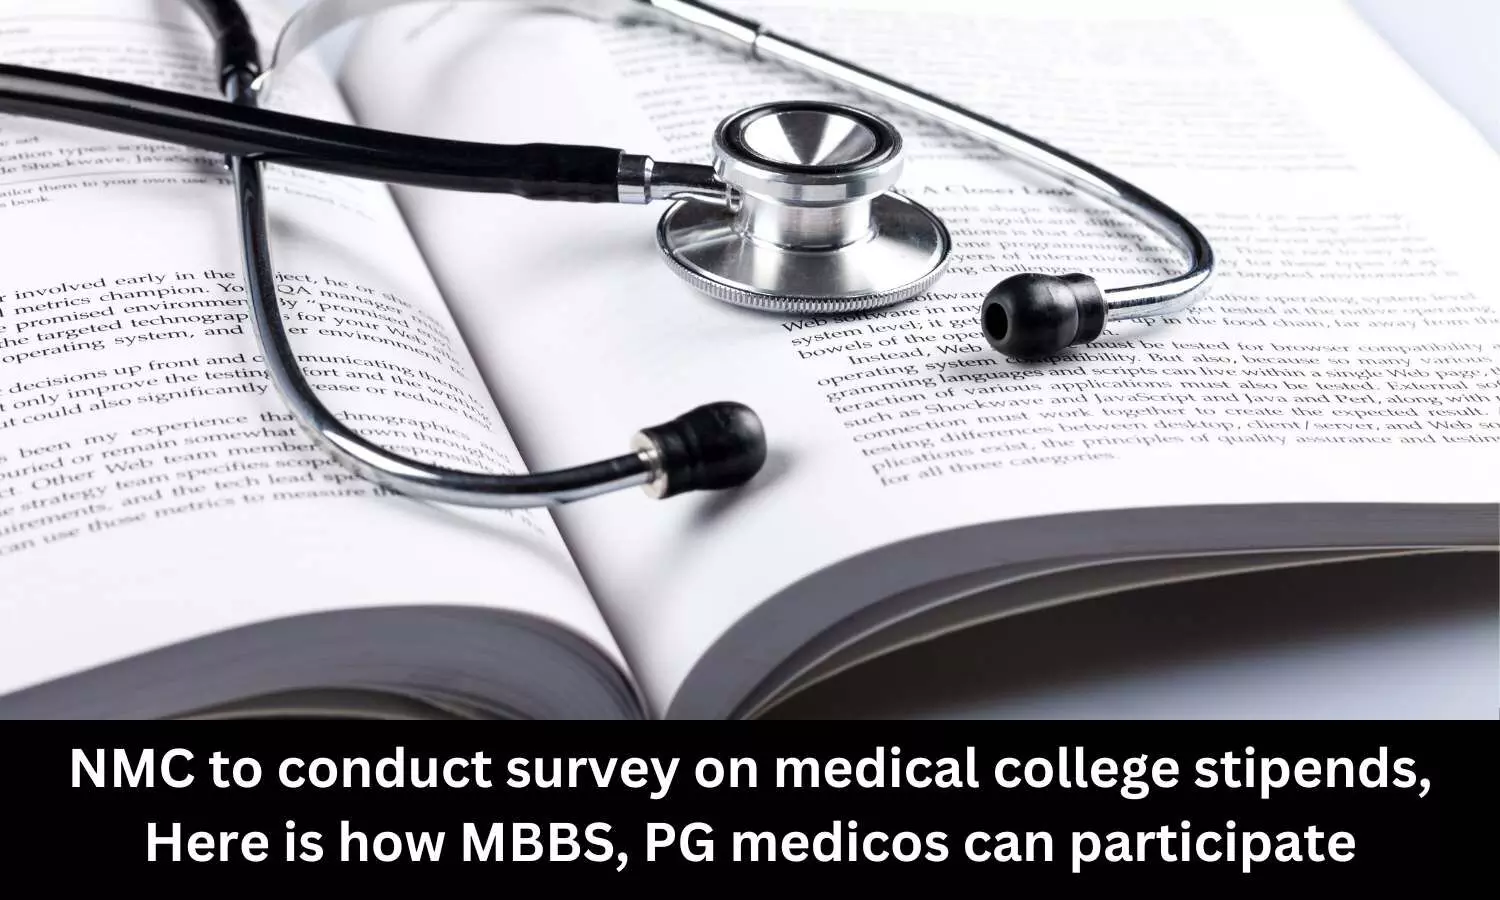 NMC to conduct survey on medical college stipends, Here is how MBBS, PG medicos can participate